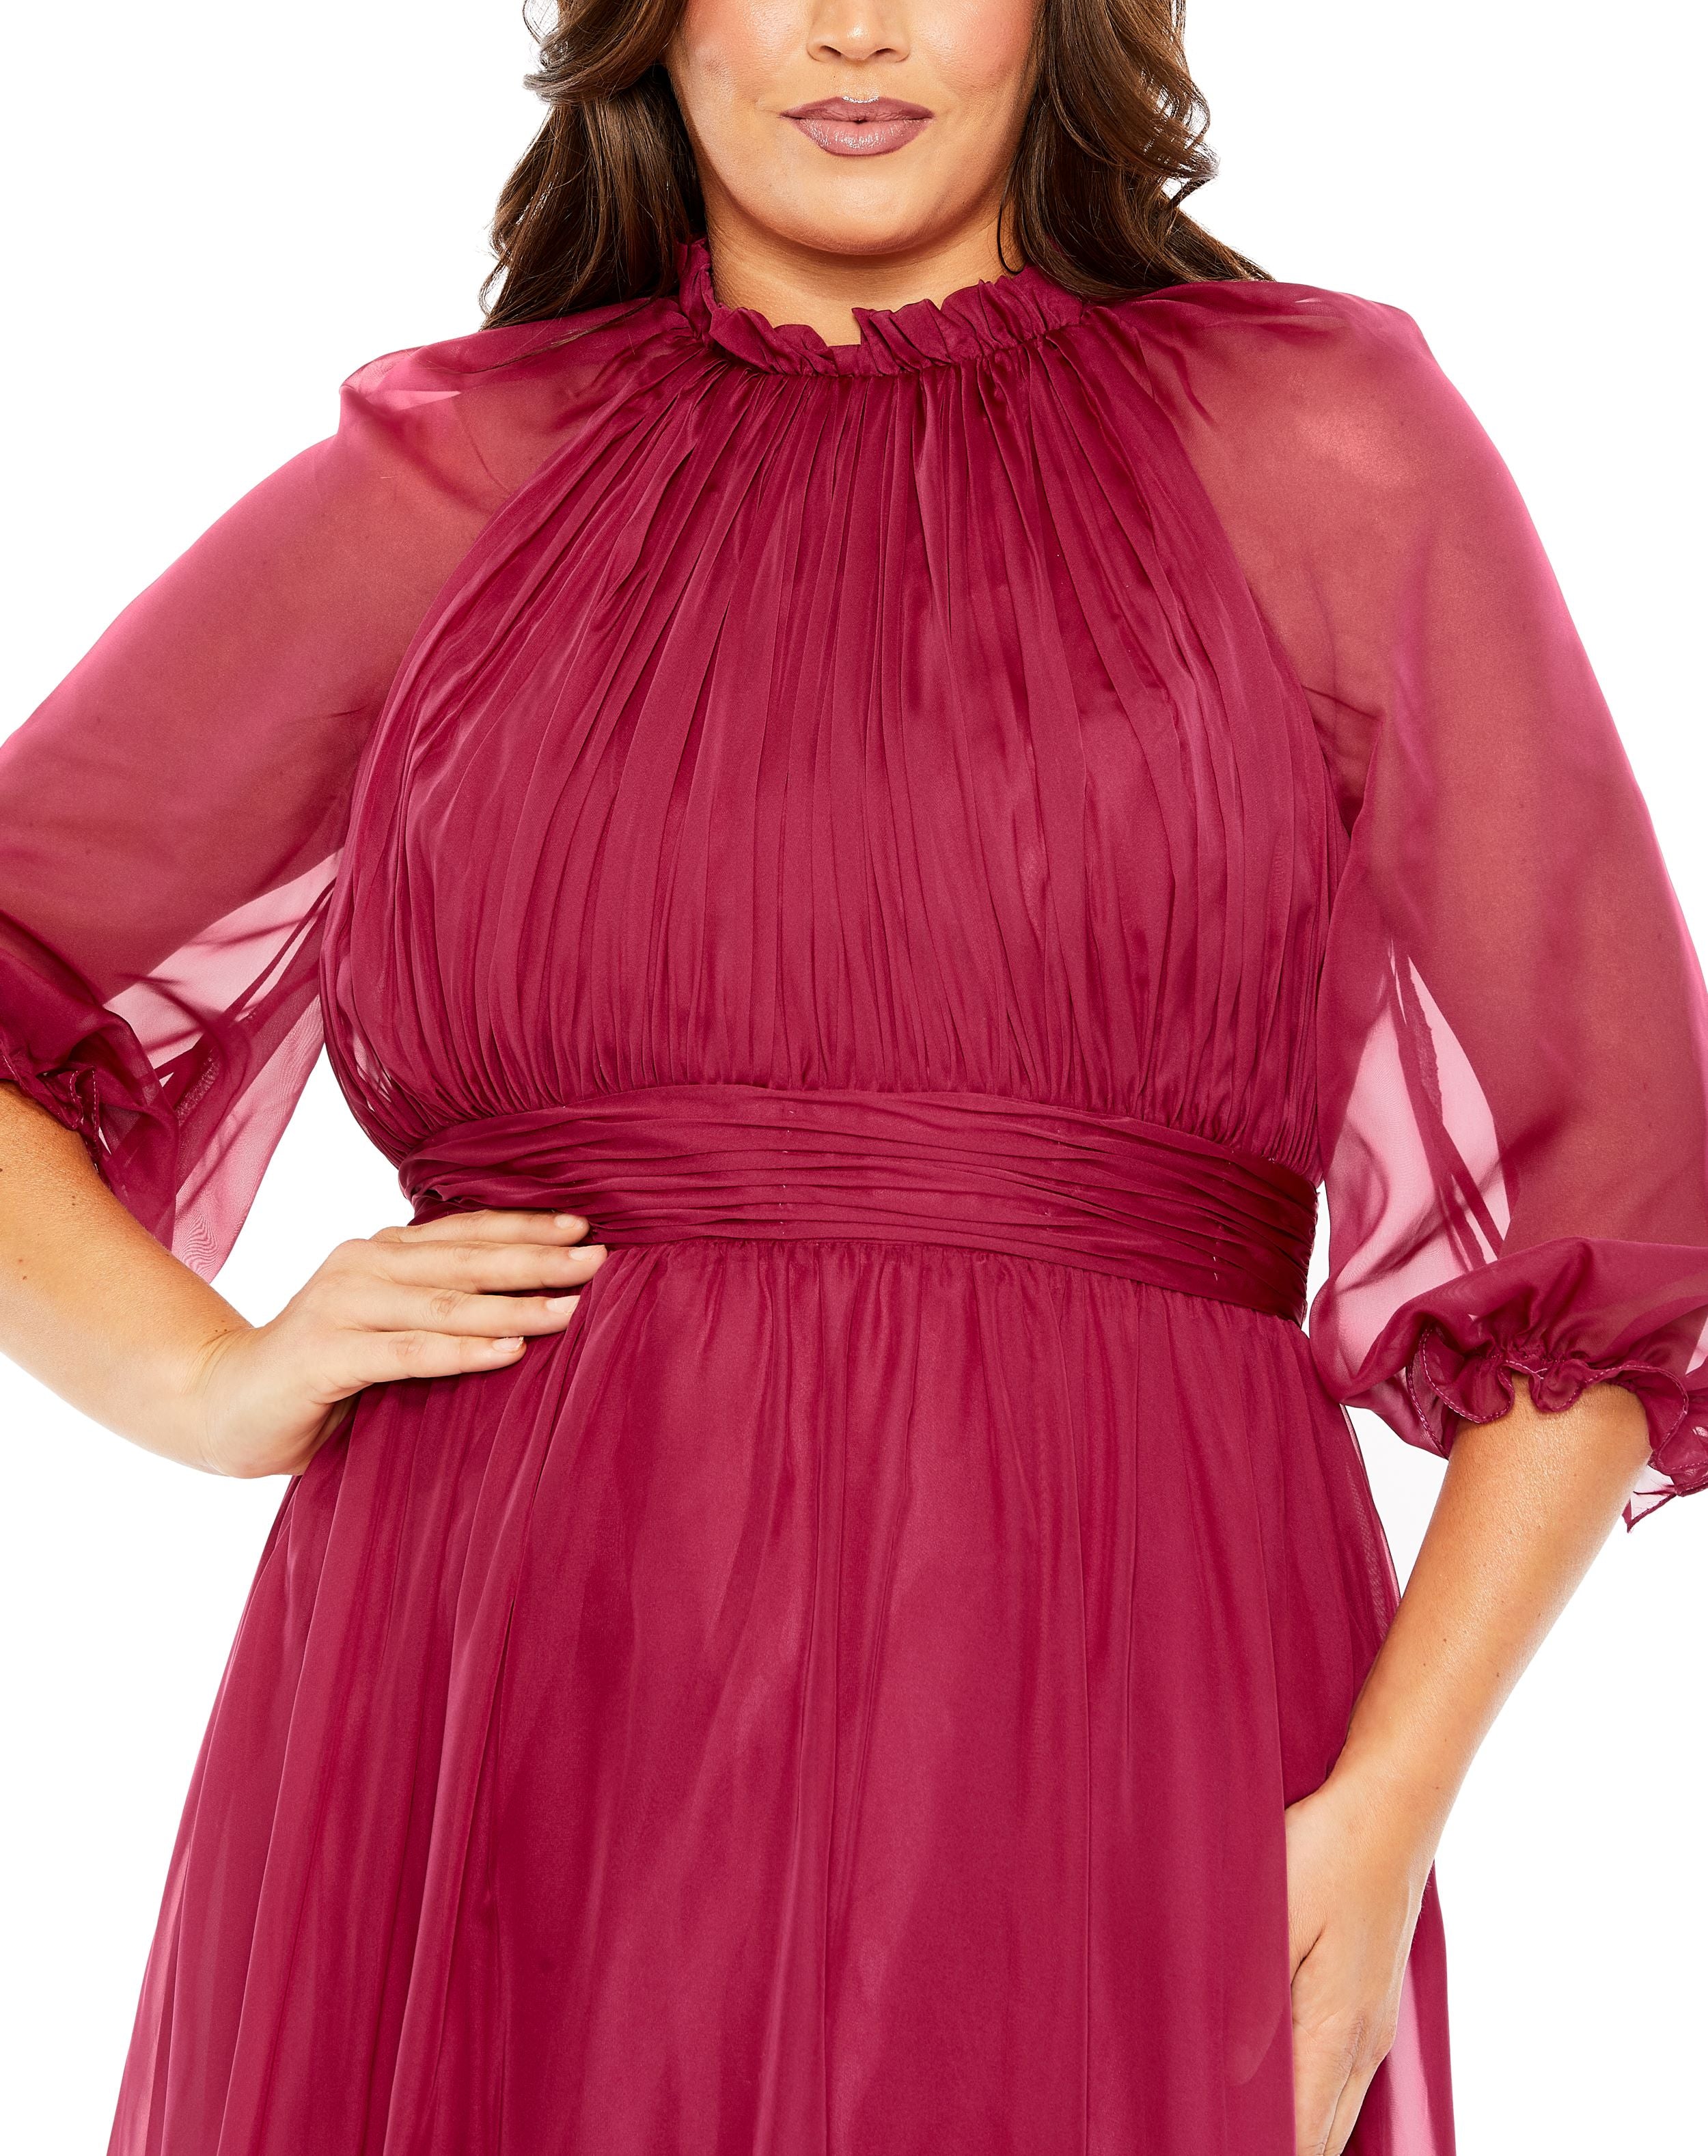 High Neck Puff Sleeve Tiered A Line Gown